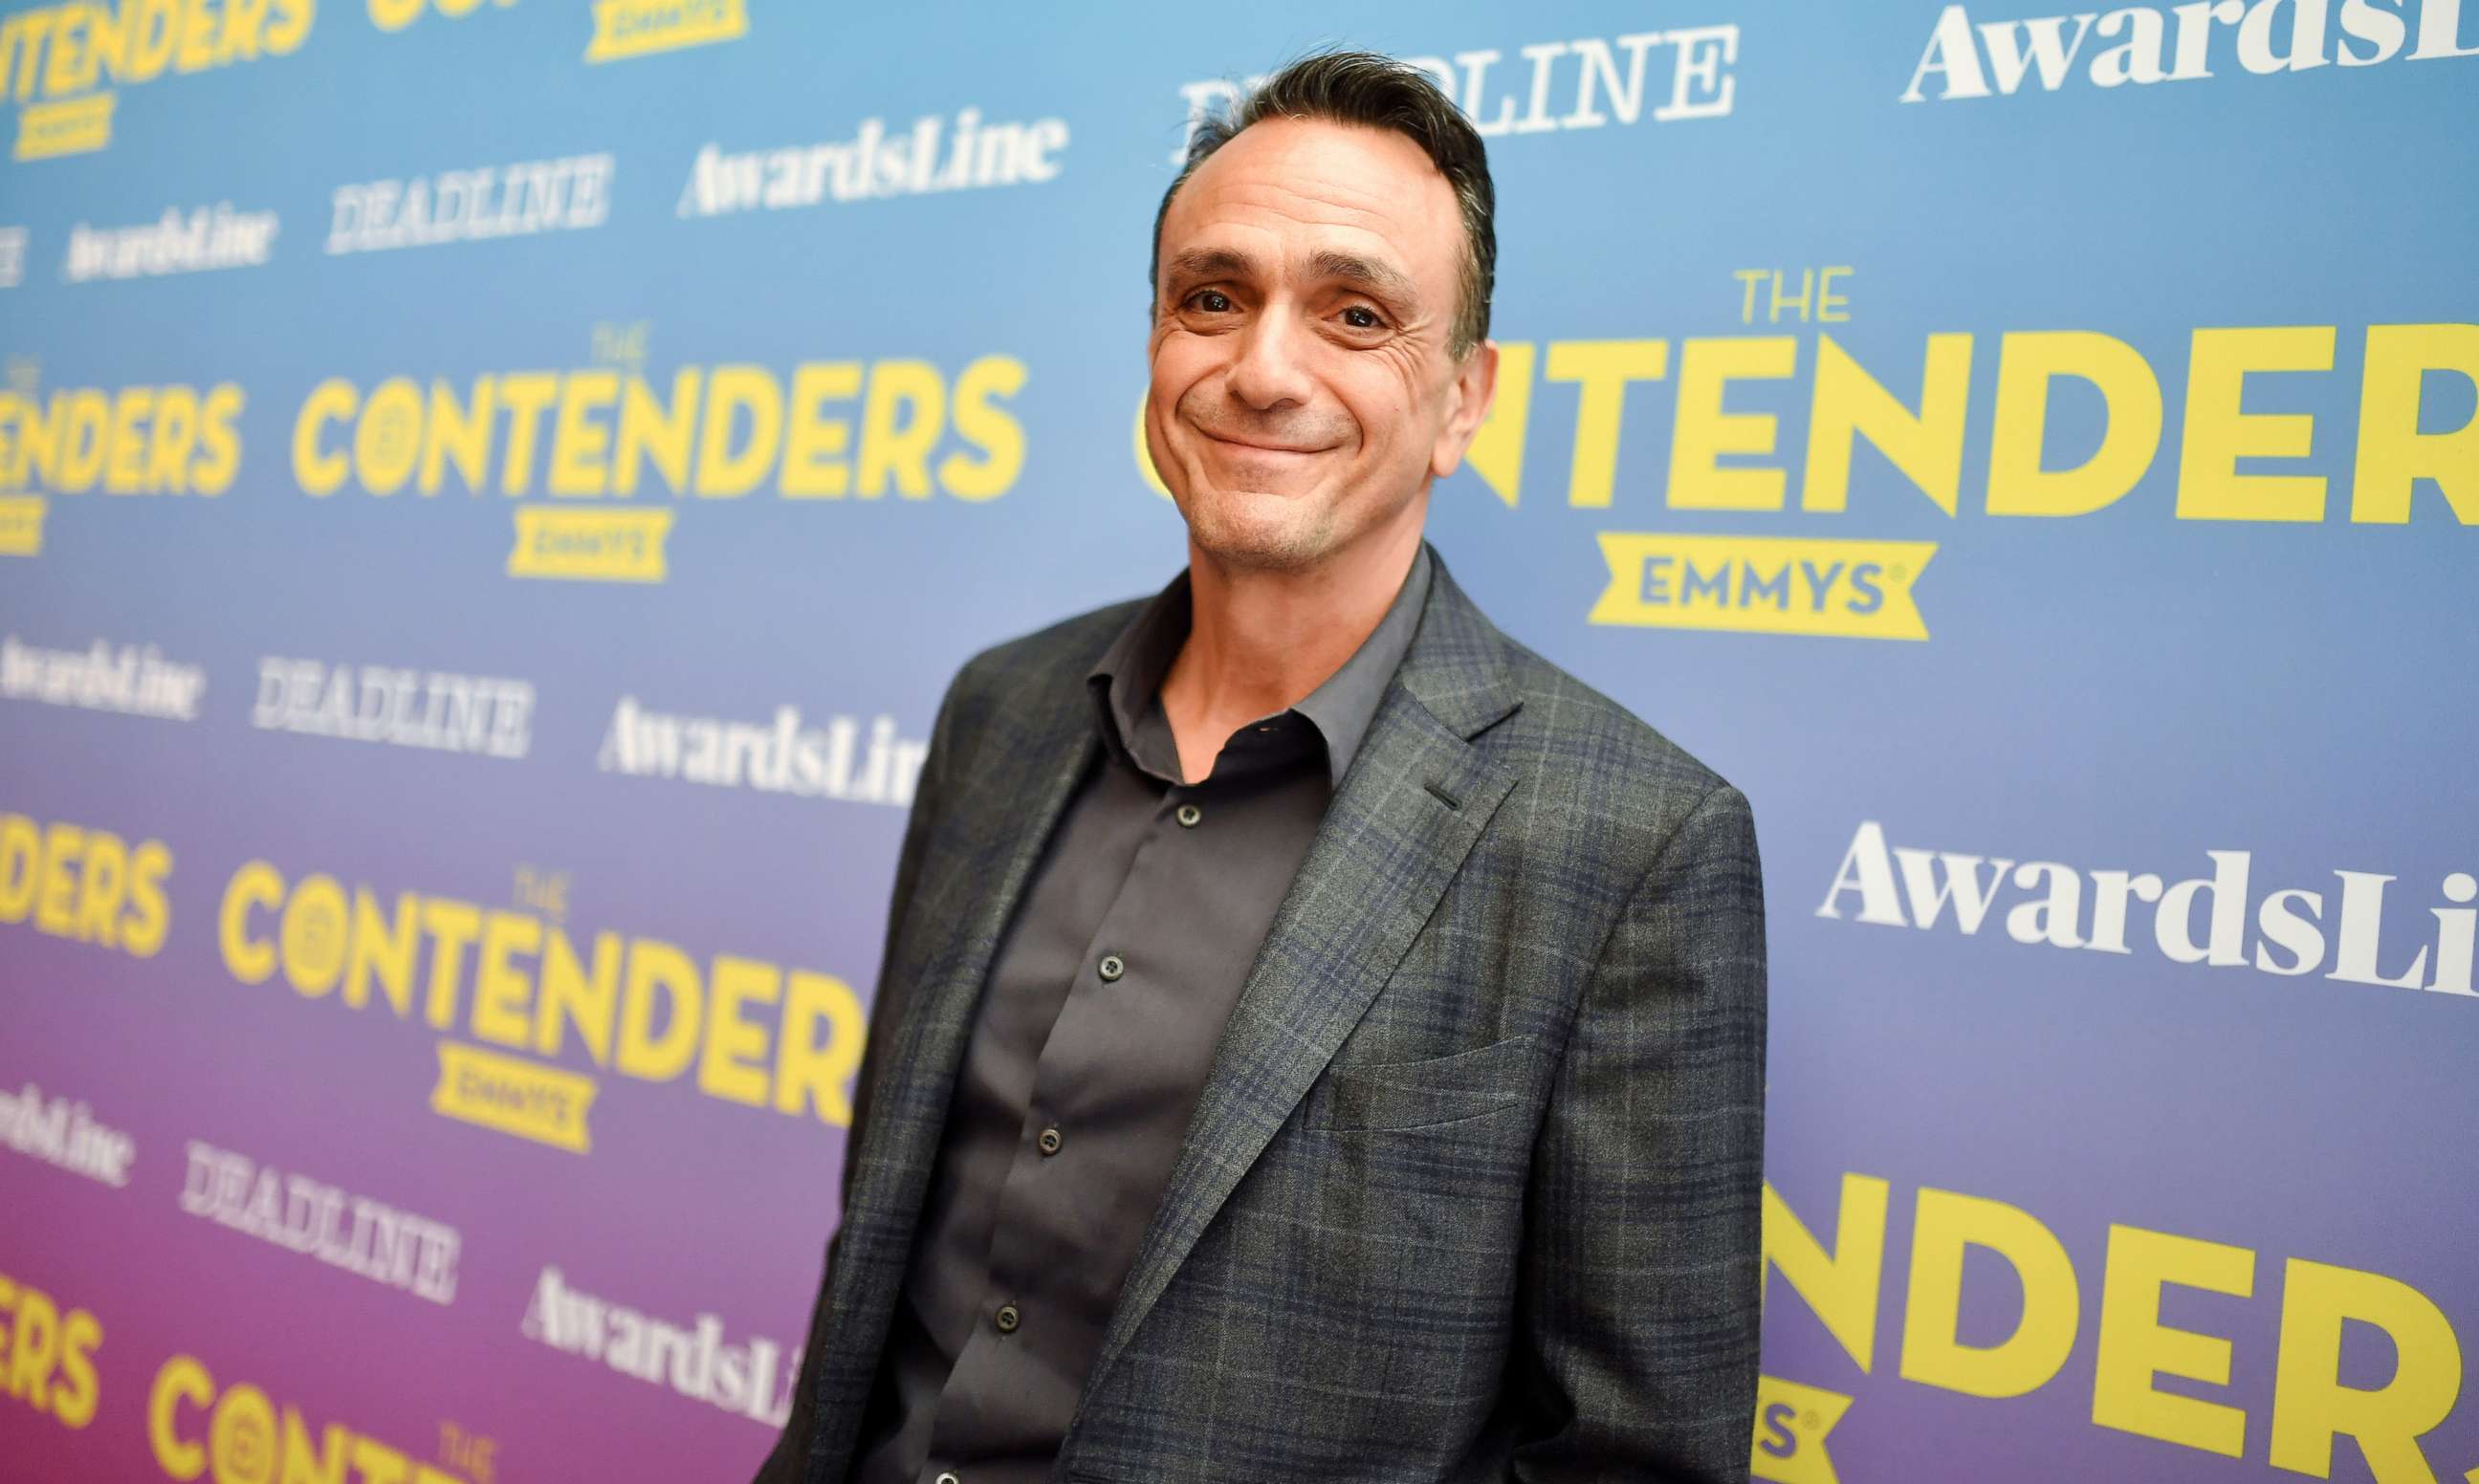 PHOTO: Hank Azaria in the green room at the Contenders Emmy's presented by Deadline Hollywood, in Los Angeles, Aprl 15, 2018.